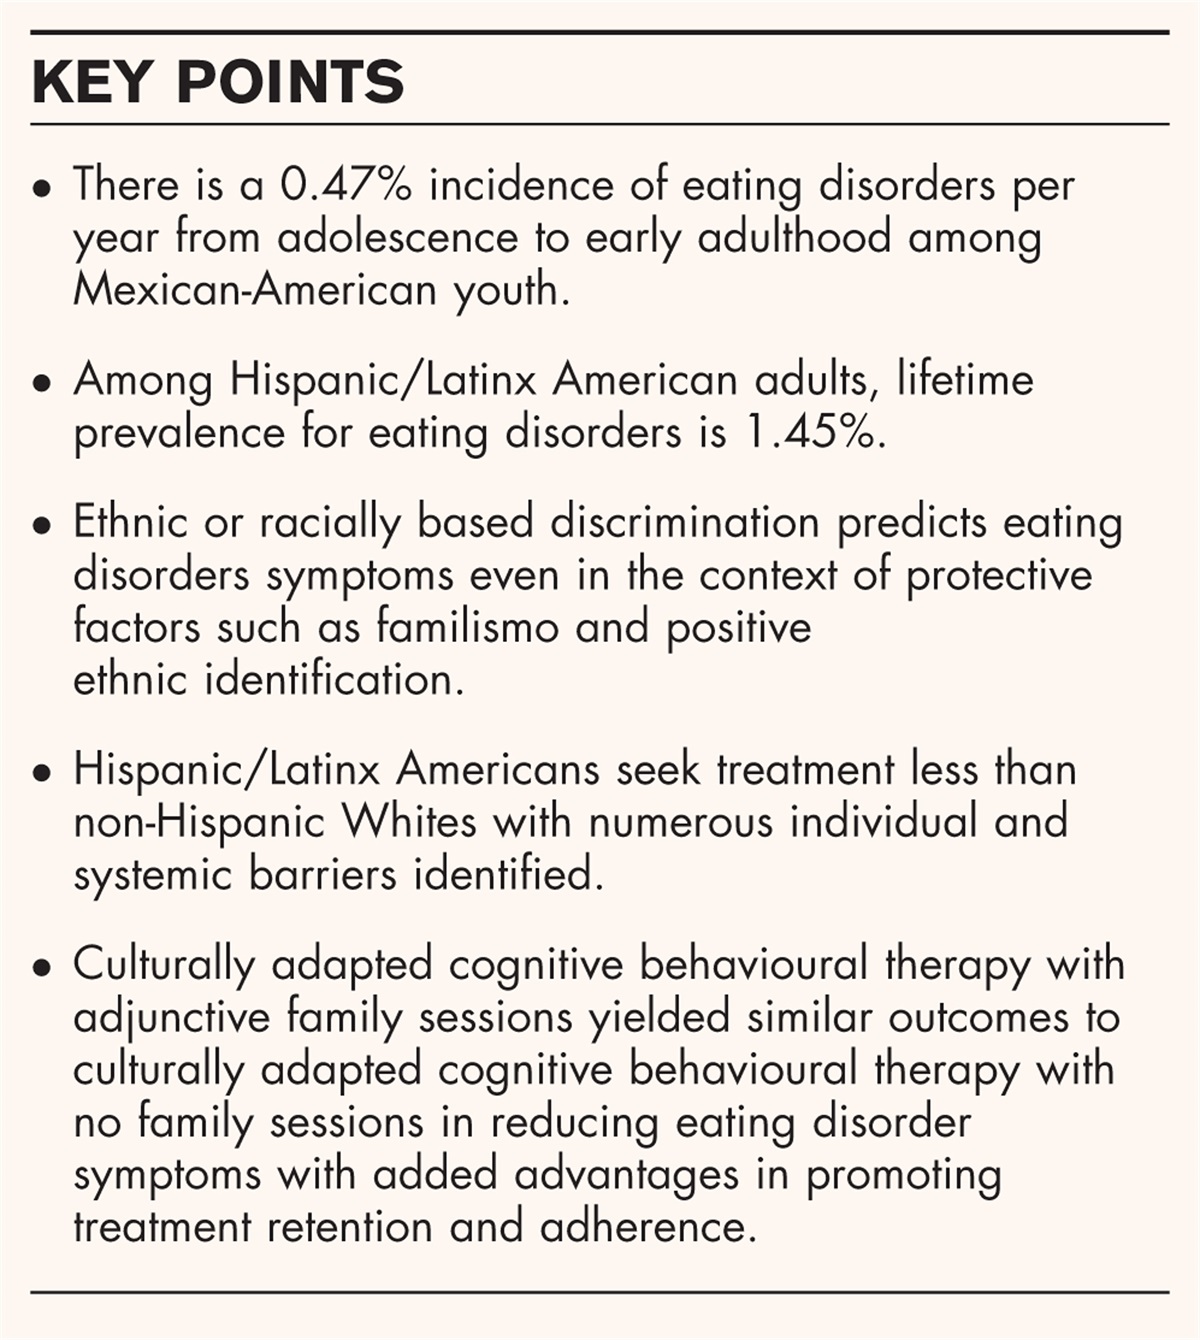 Update on the epidemiology and treatment of eating disorders among Hispanic/Latinx Americans in the United States